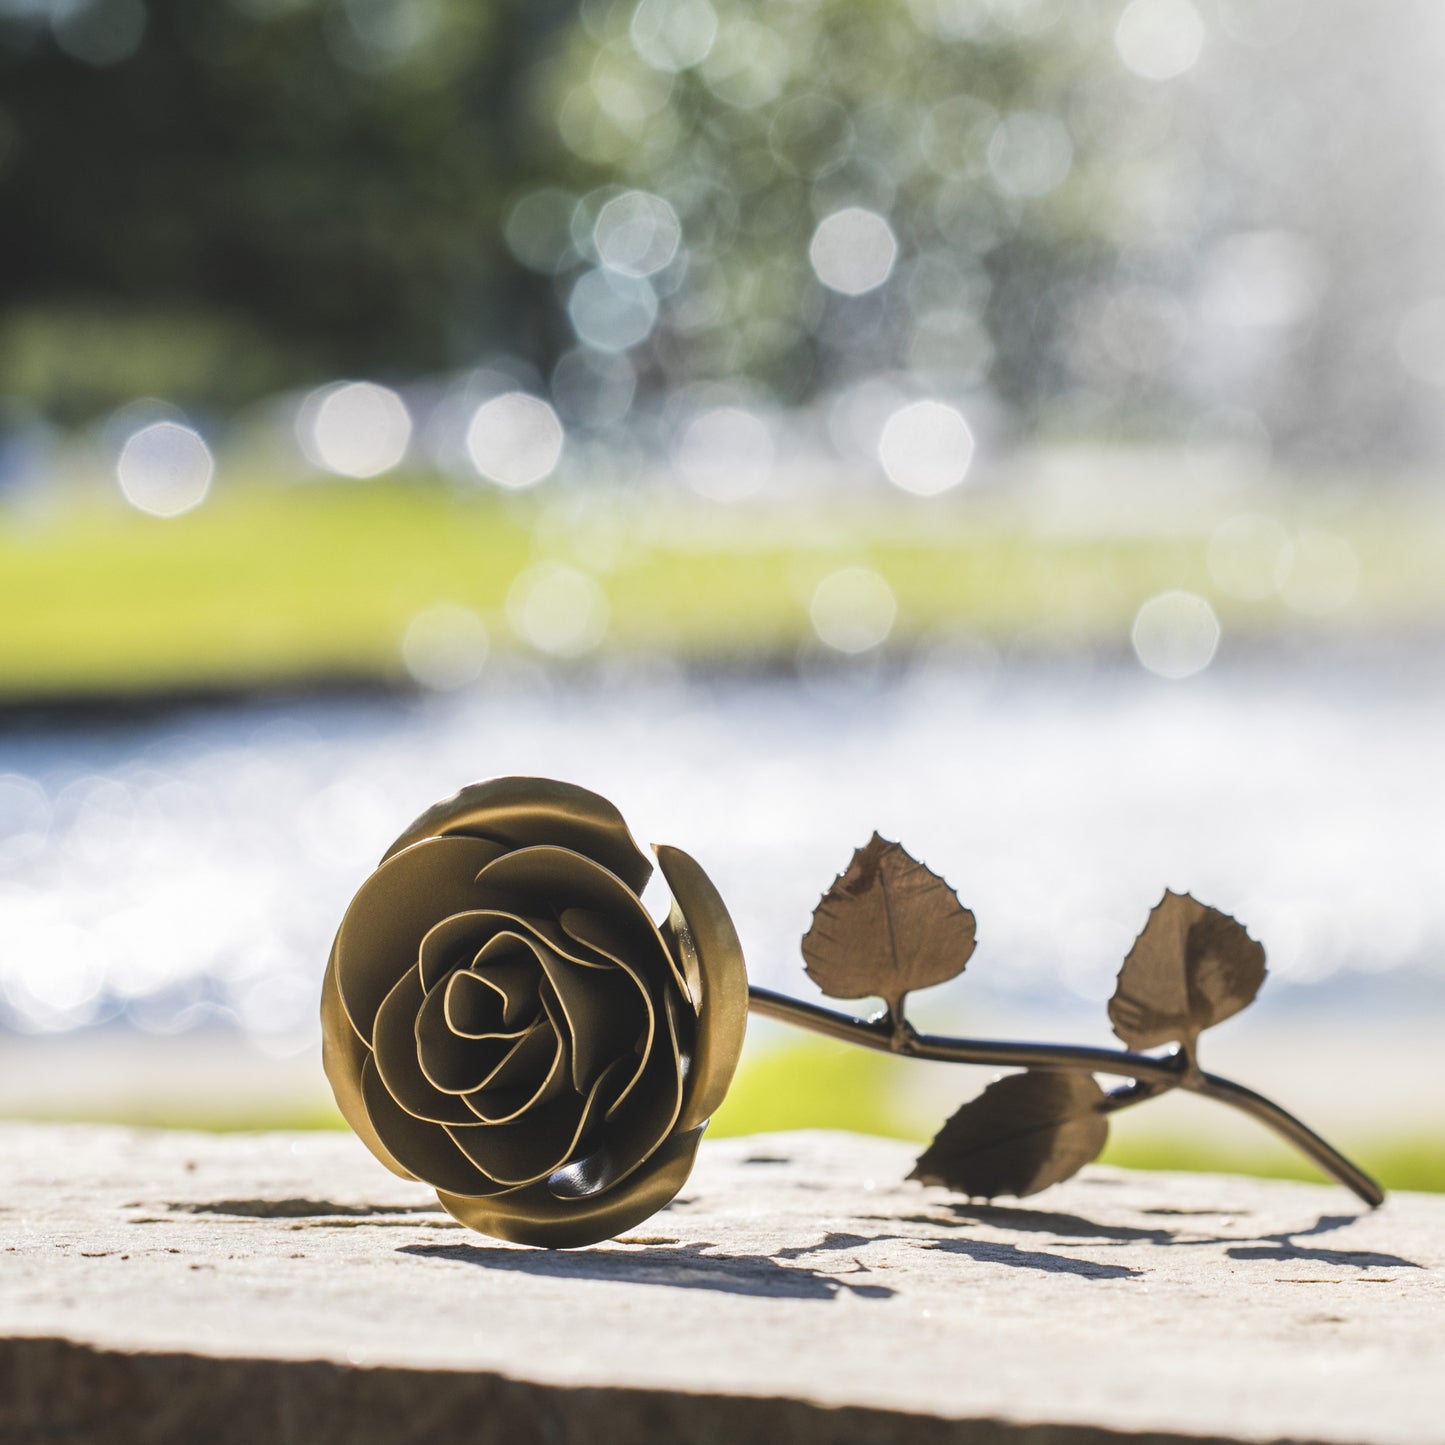 Personalized Gift - Gold Metal Rose for 50th Anniversary